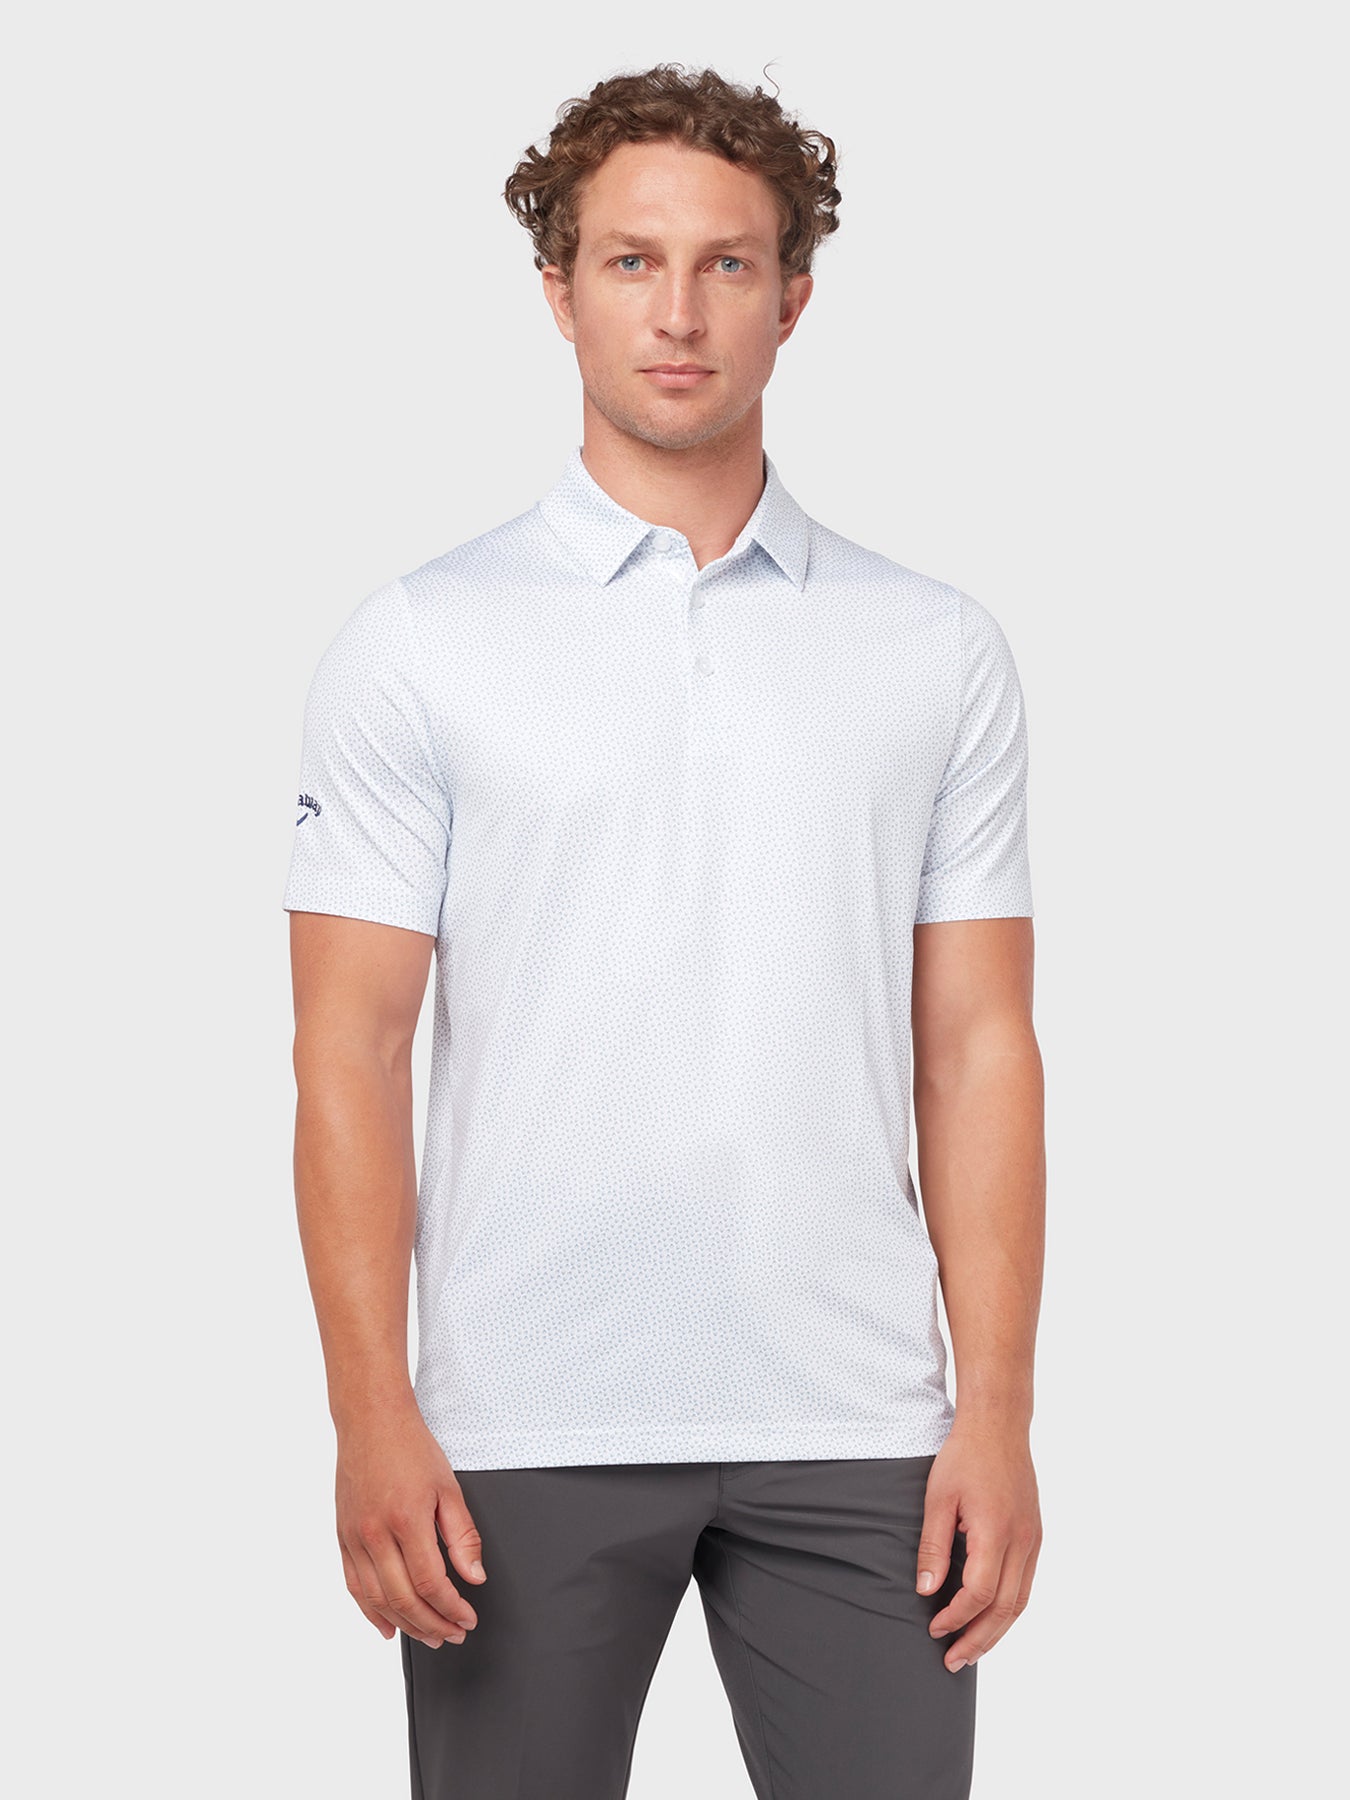 View Trademark Geo Print Polo In Bright White information